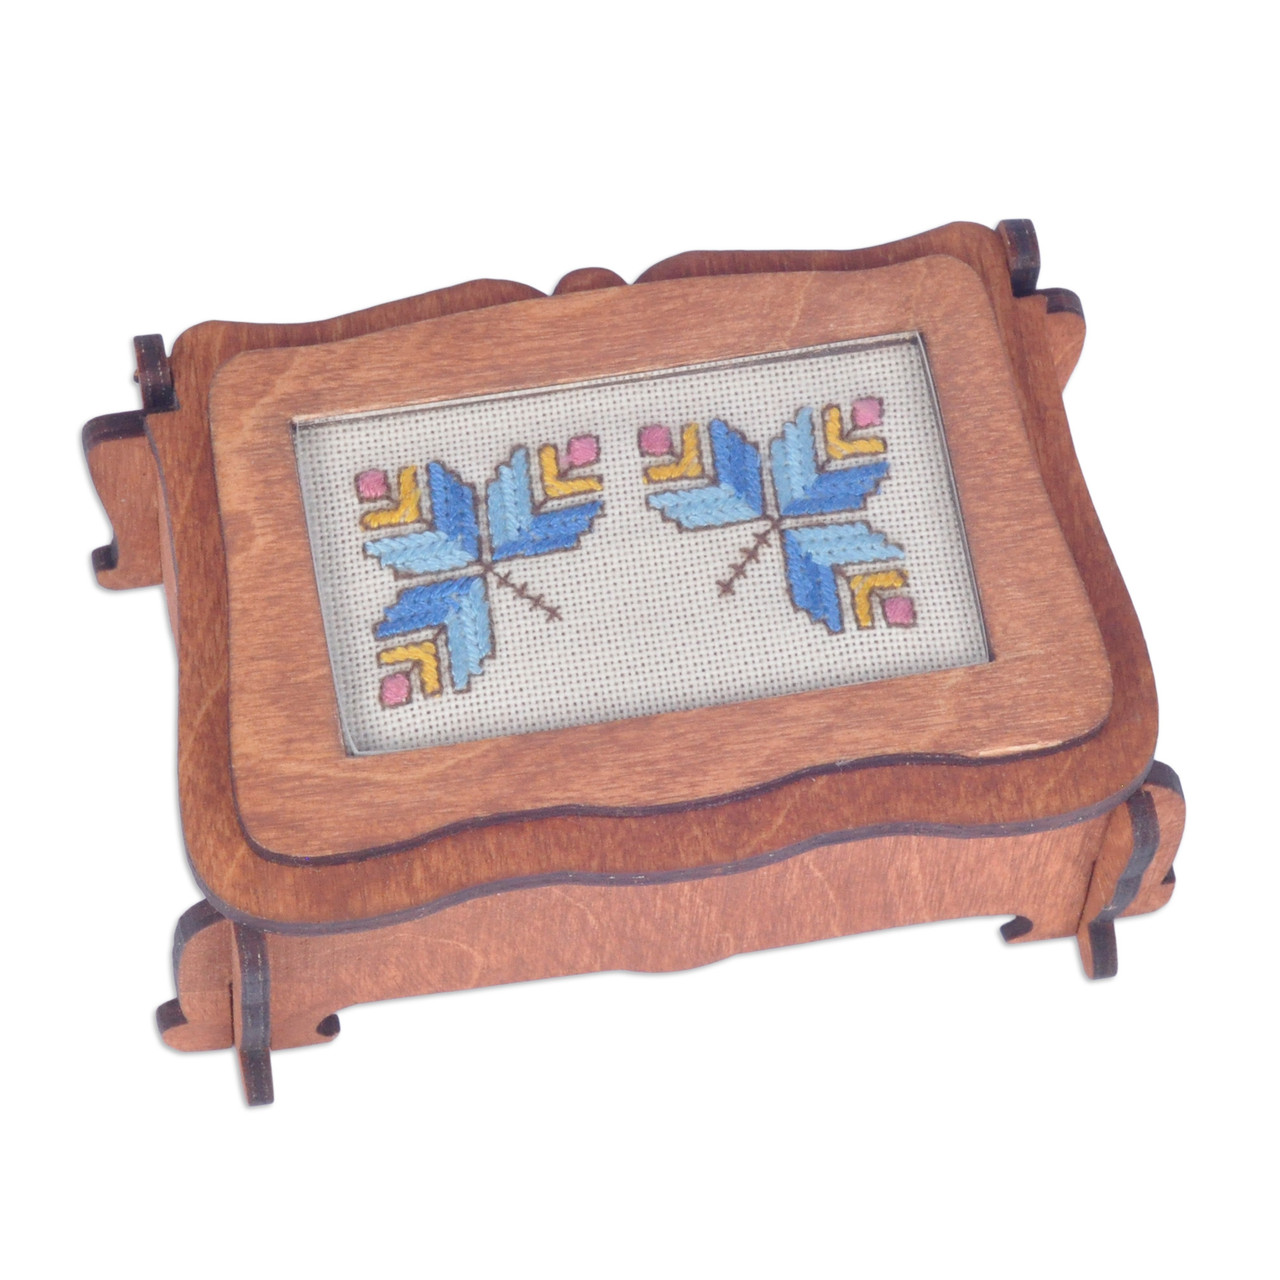 Handmade Wood Jewelry Box Topped by Cotton Embroidered Motif - Charming  Lotus